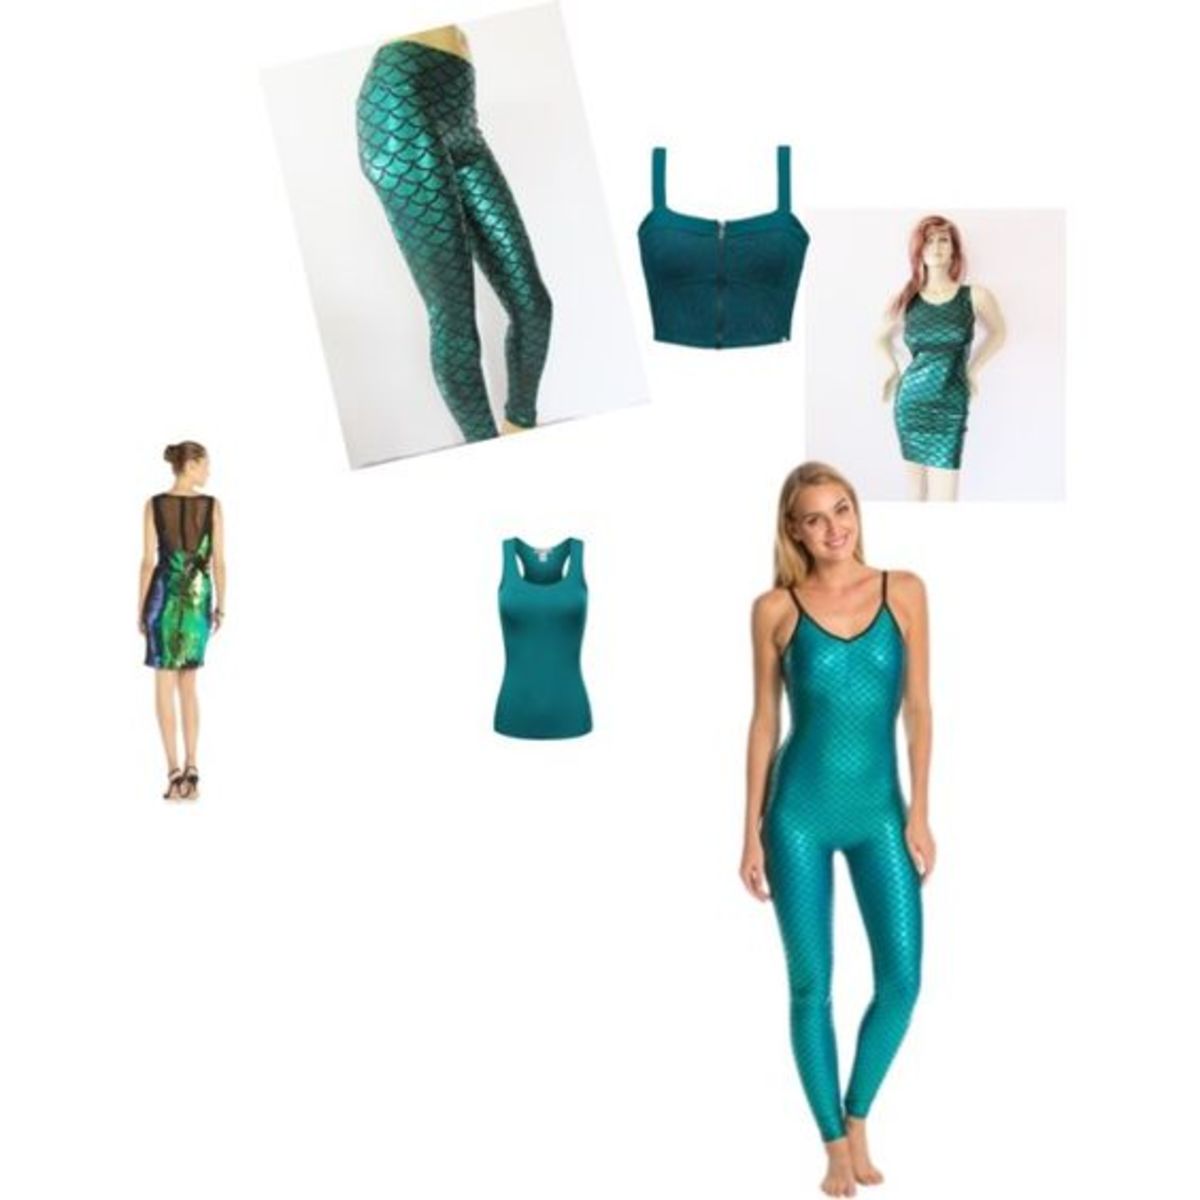 Diy How To Make A Mera Costume For Halloween Hubpages